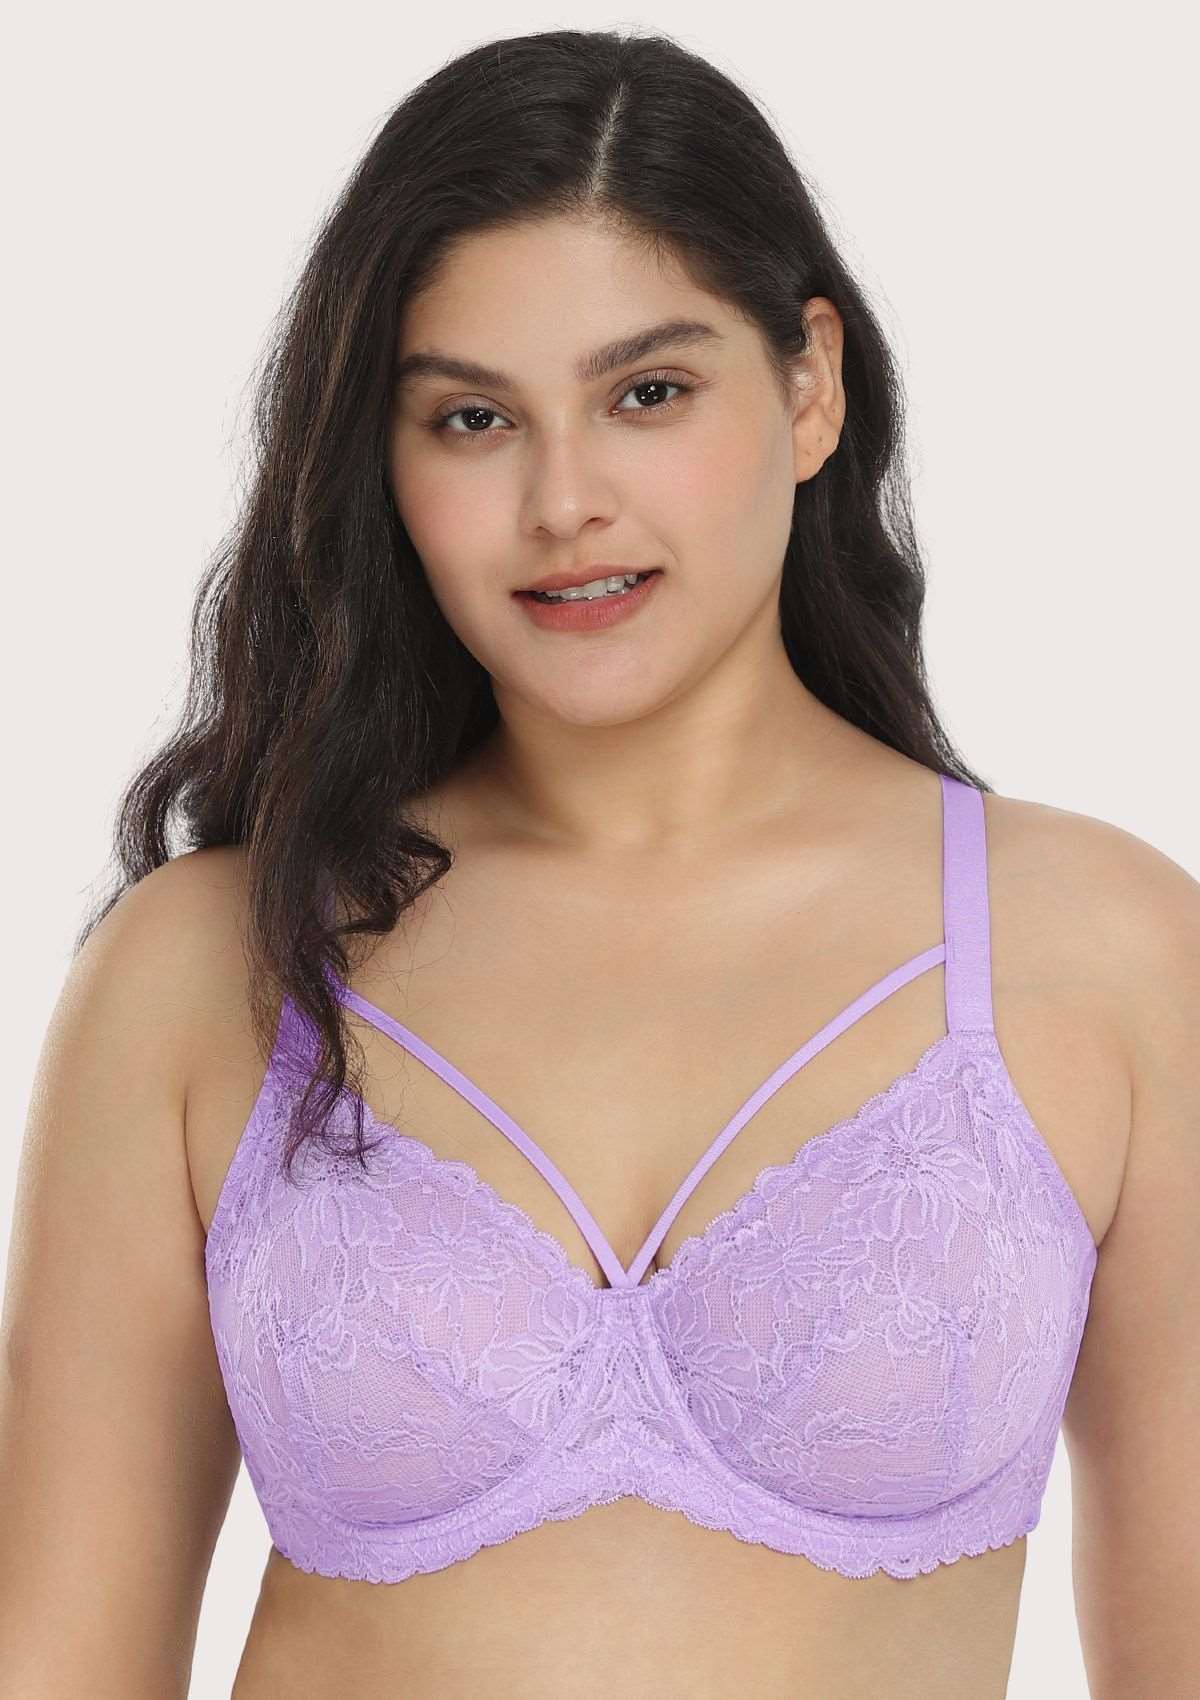 HSIA Pretty In Petals See-Through Lace Bra: Lift And Separate - Purple / 40 / C